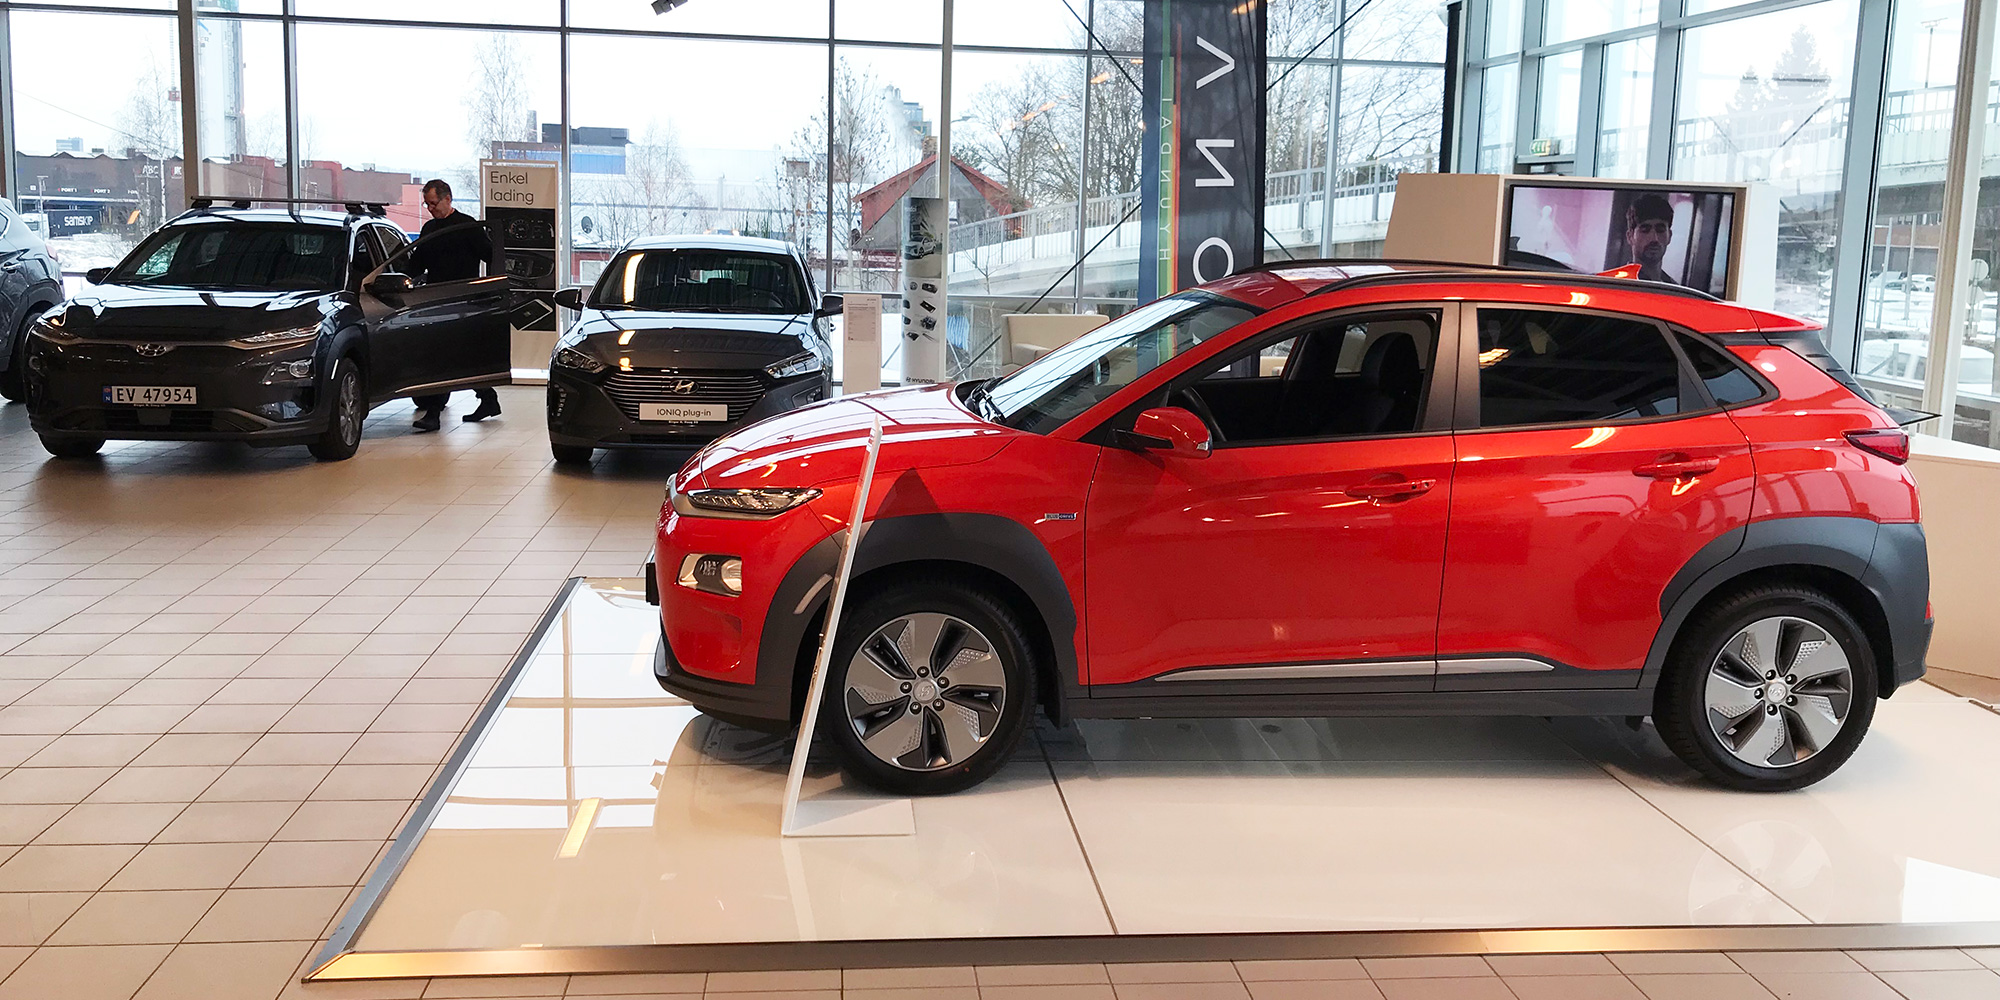 the Birger N. Haug Nissan dealership in Oslo is a big seller of Nissan LEAFs and Kona EVs